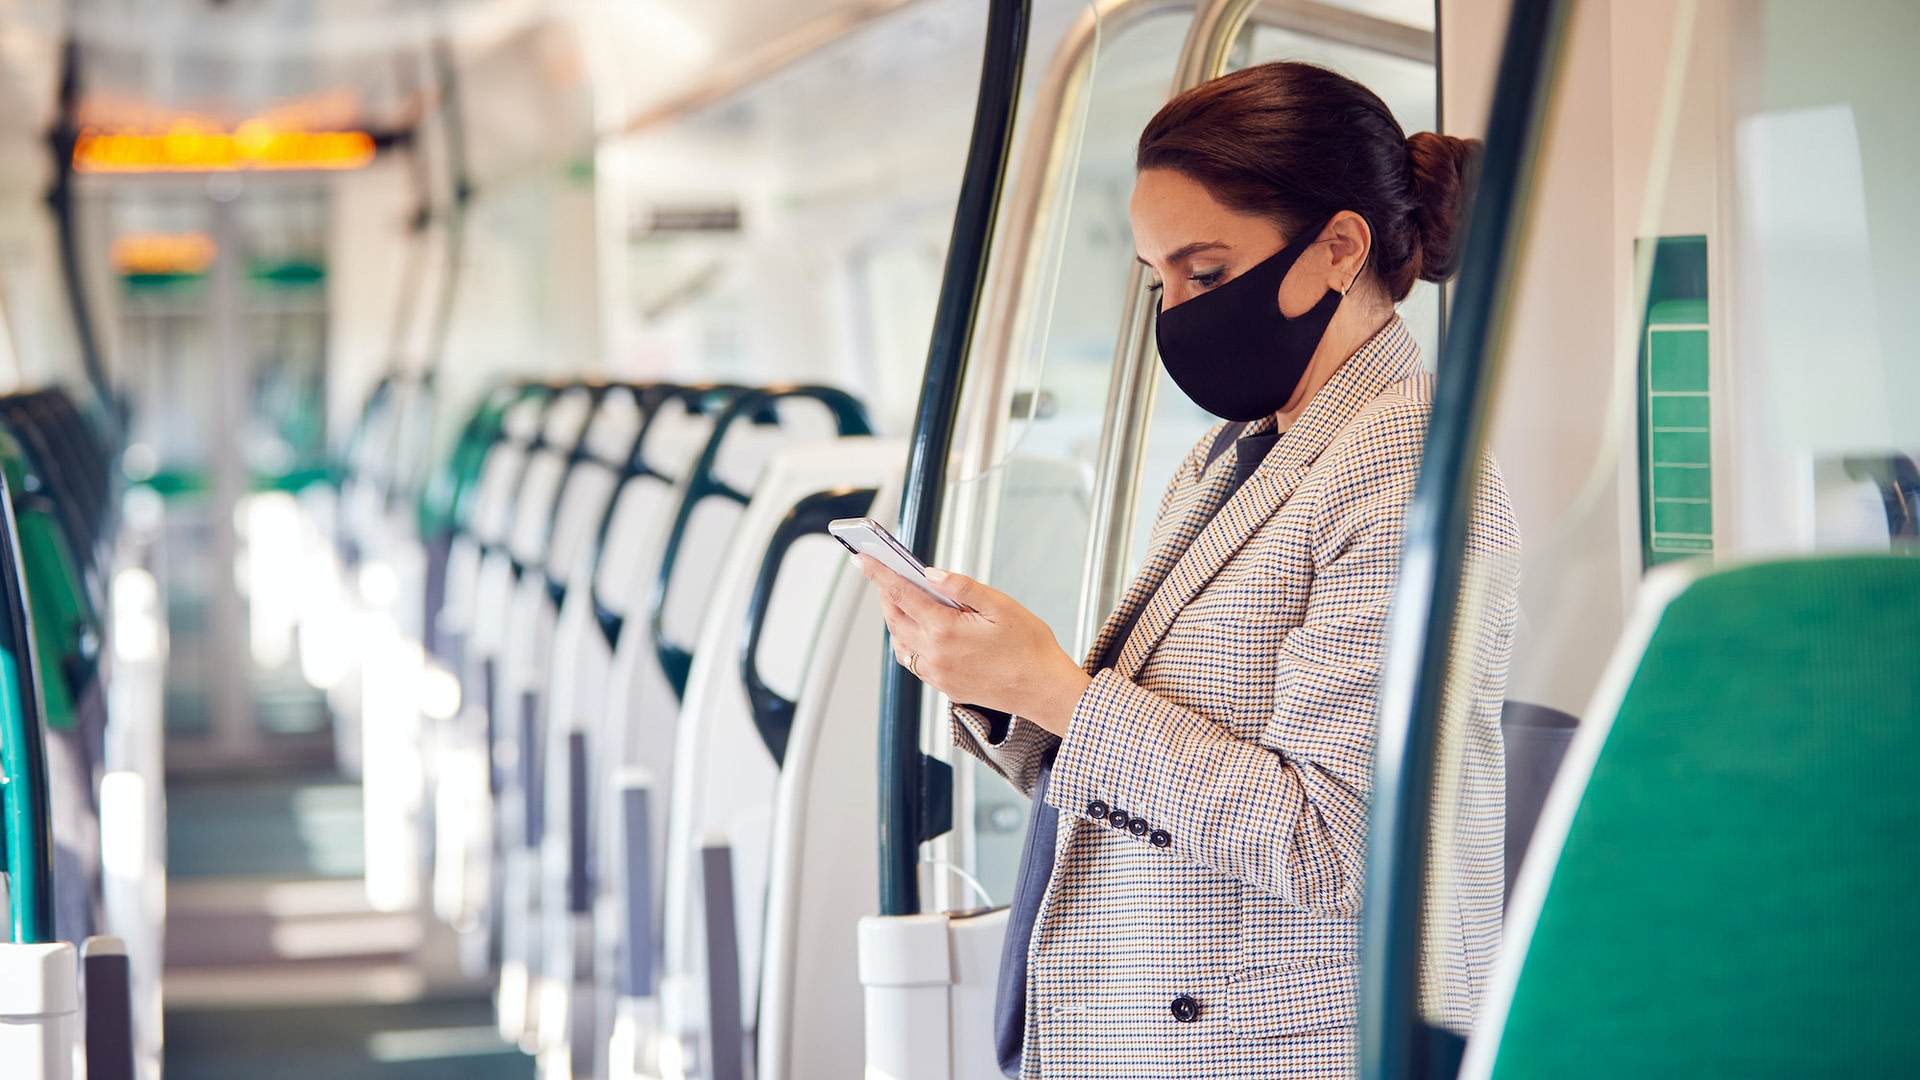 Businesswoman Stands In Train Carriage Using Mobile Phone Wearing PPE Face Masks During Pandemic